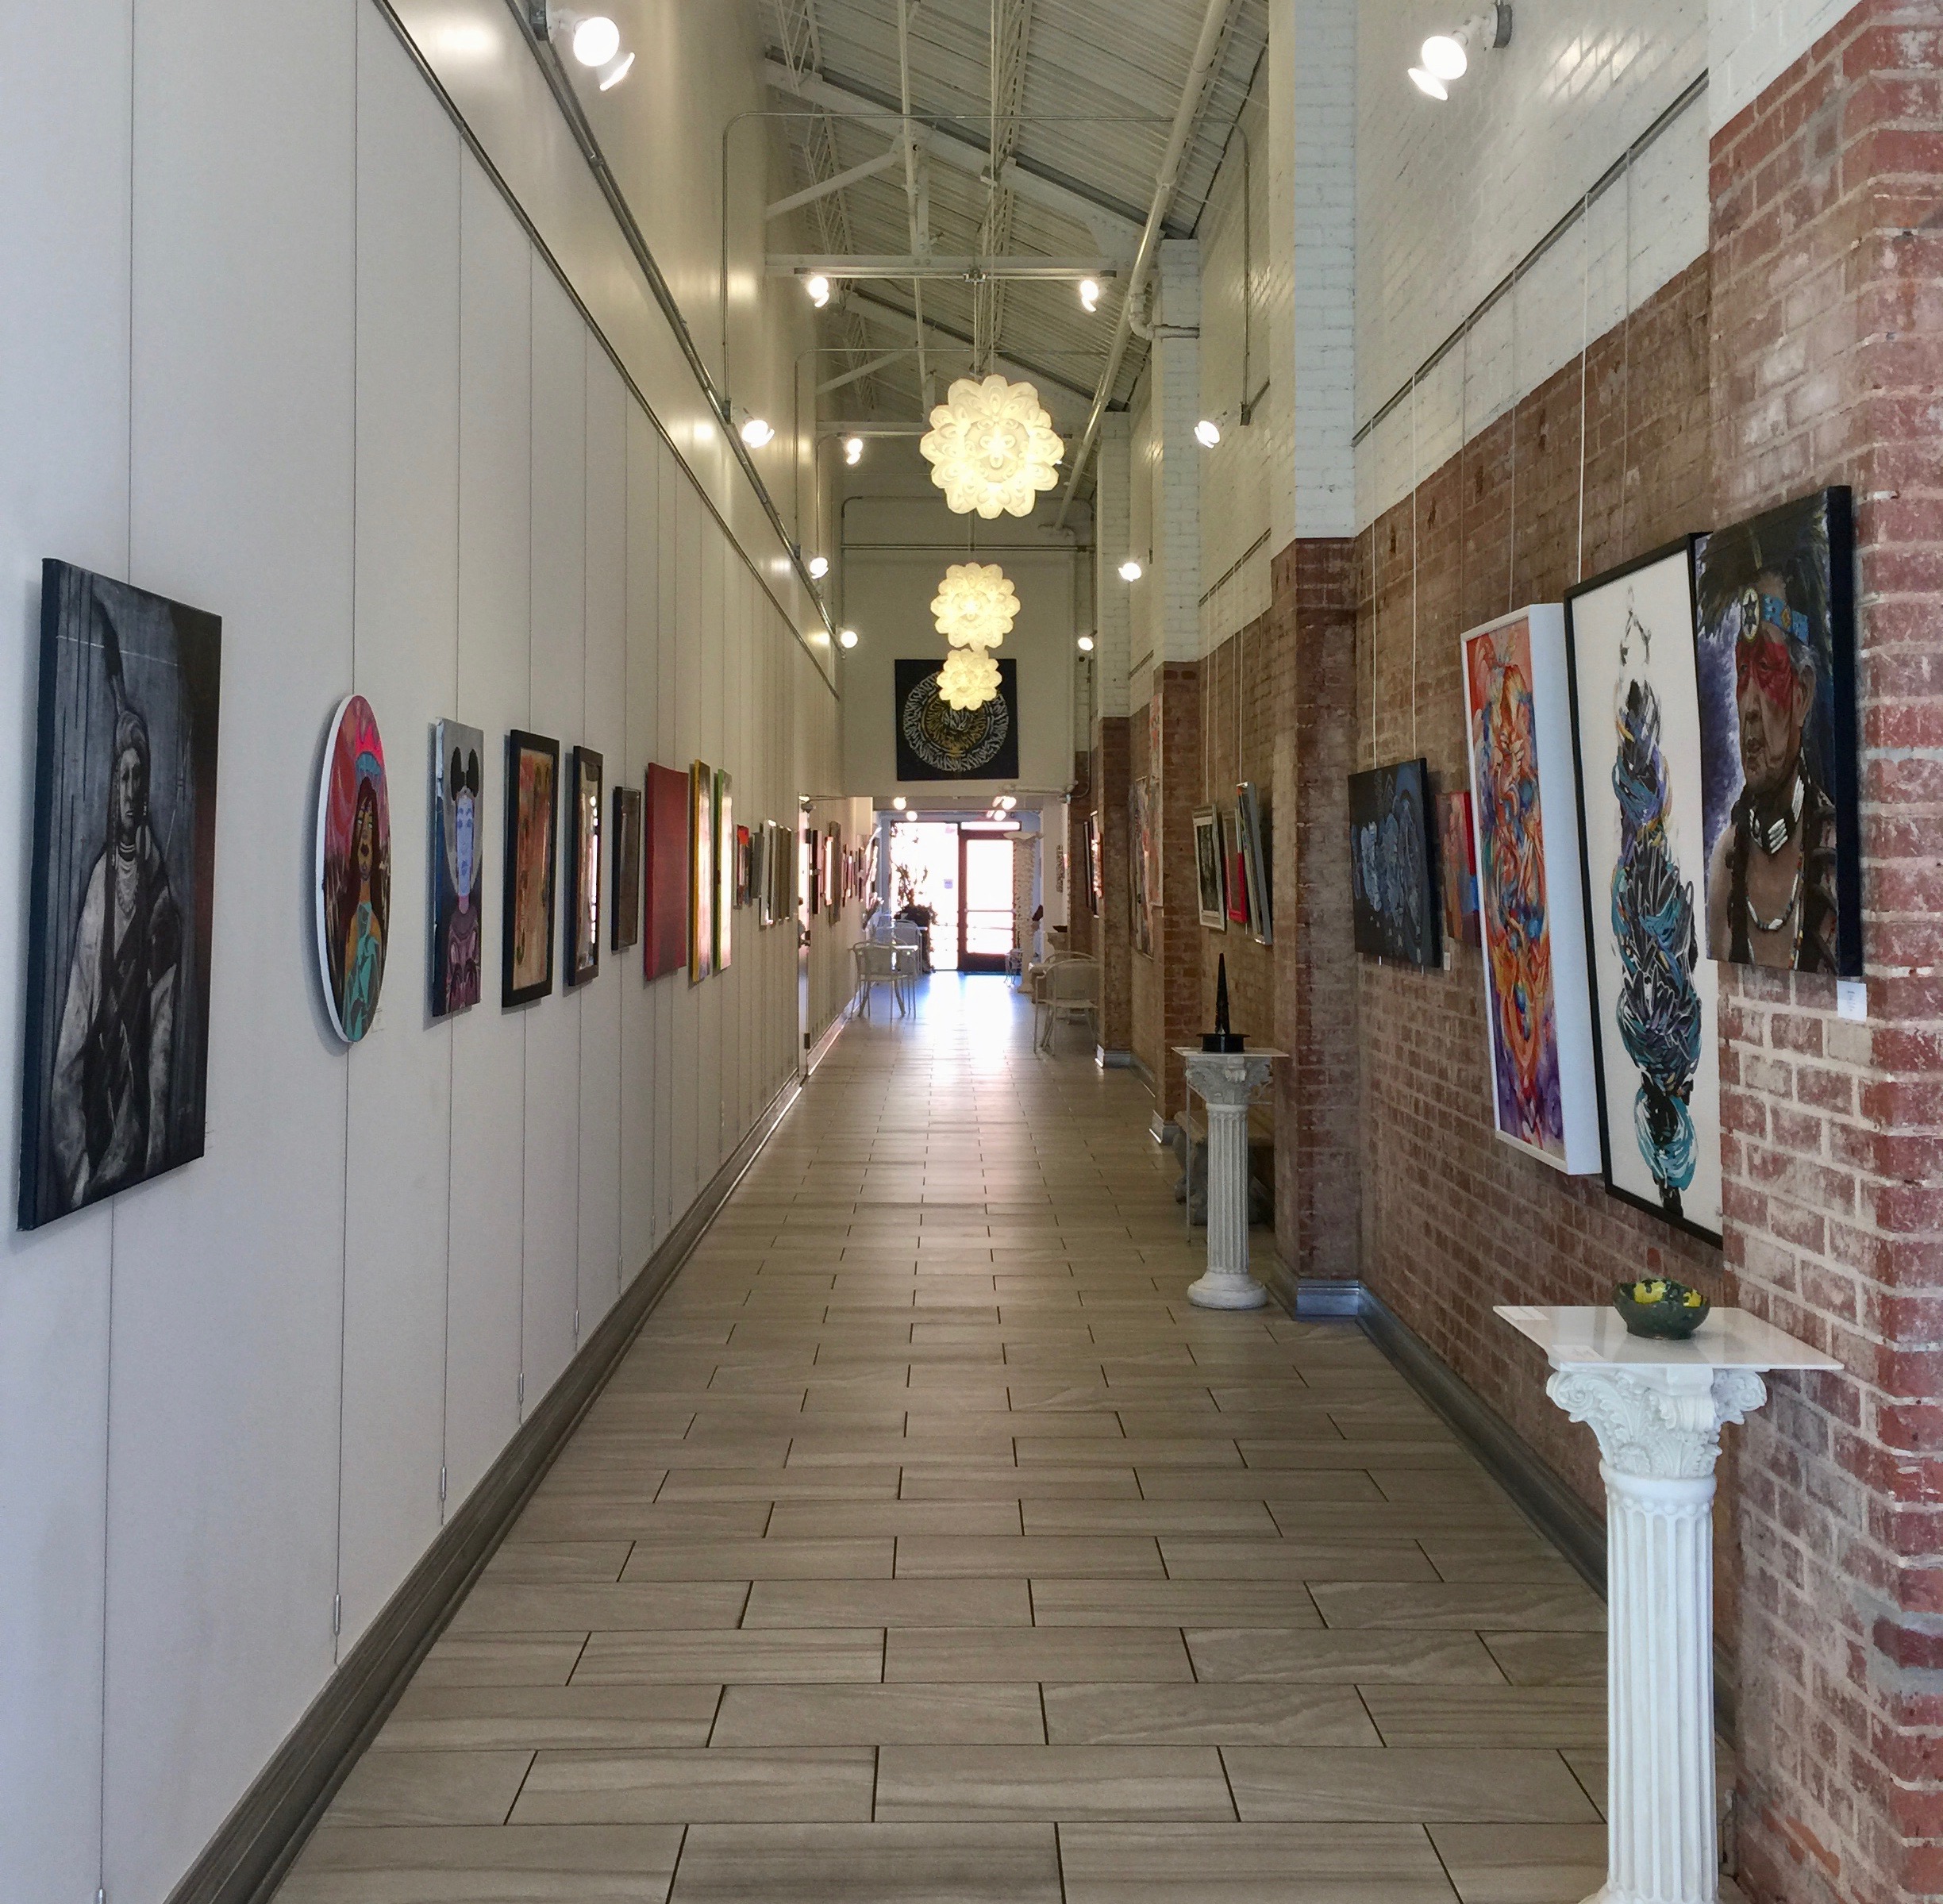 Inclusion in Art at The Art Hall, Dec 2018-March 2019